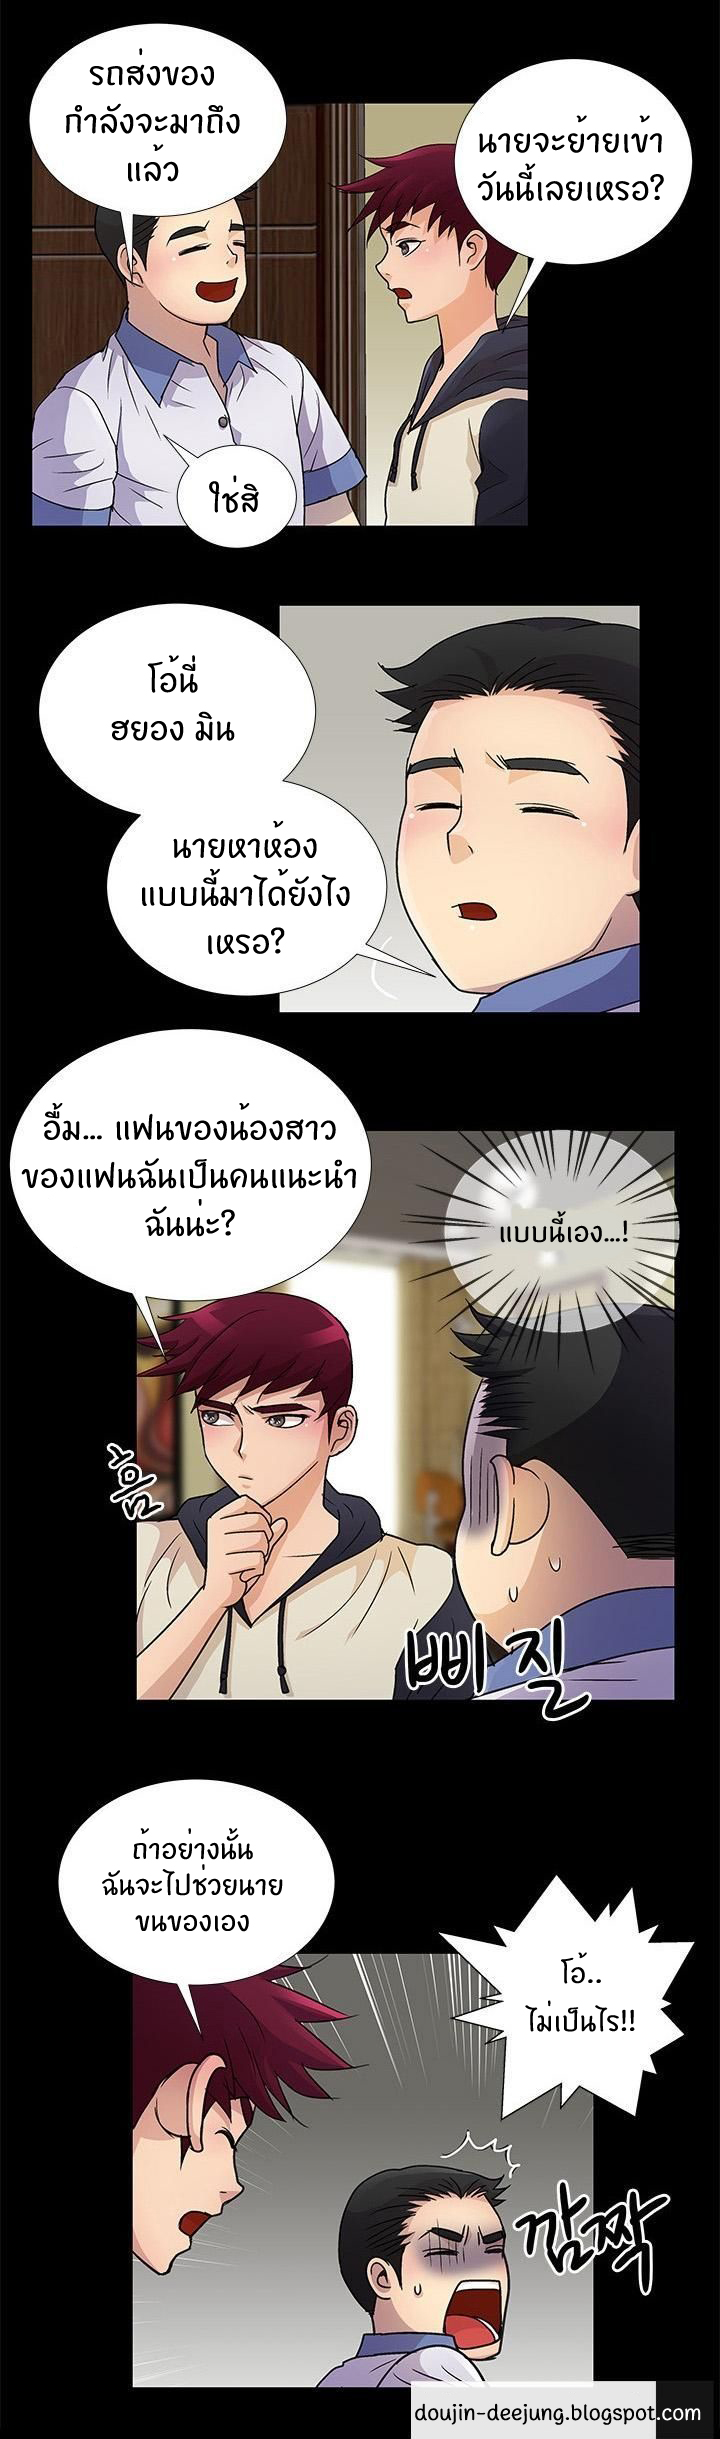 Will You Do as I Say? - หน้า 8